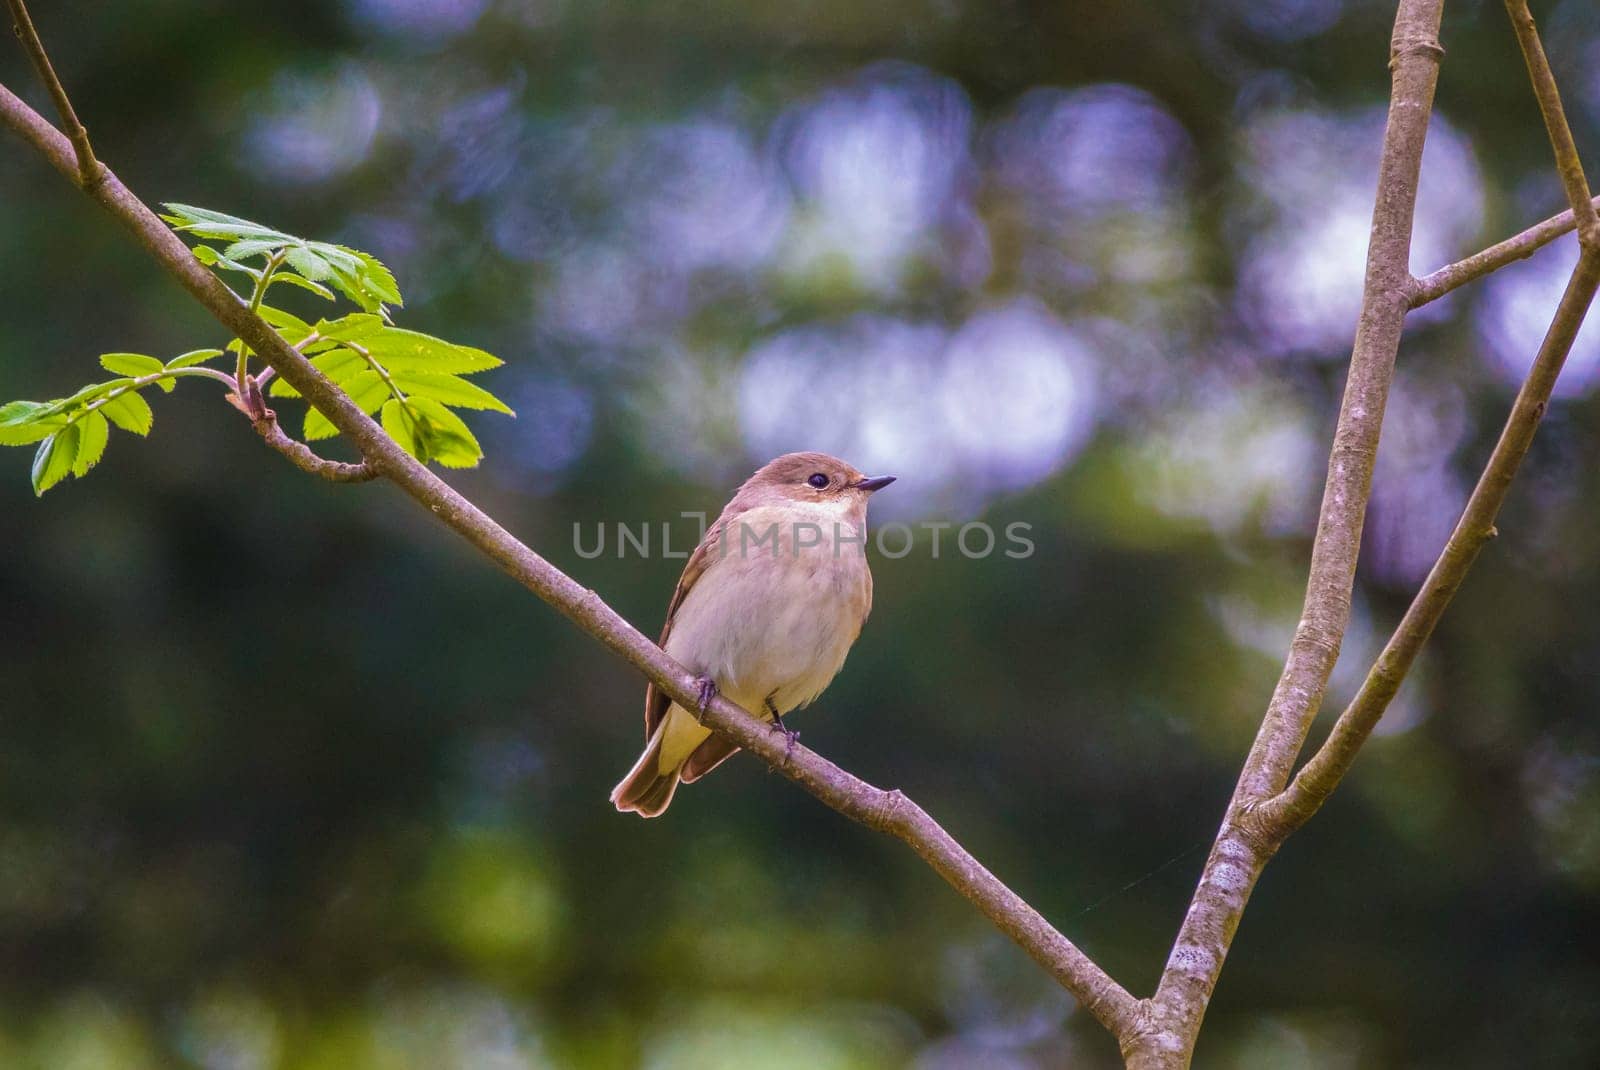 Muscicapa striata or The spotted flycatcher in a tree by compuinfoto